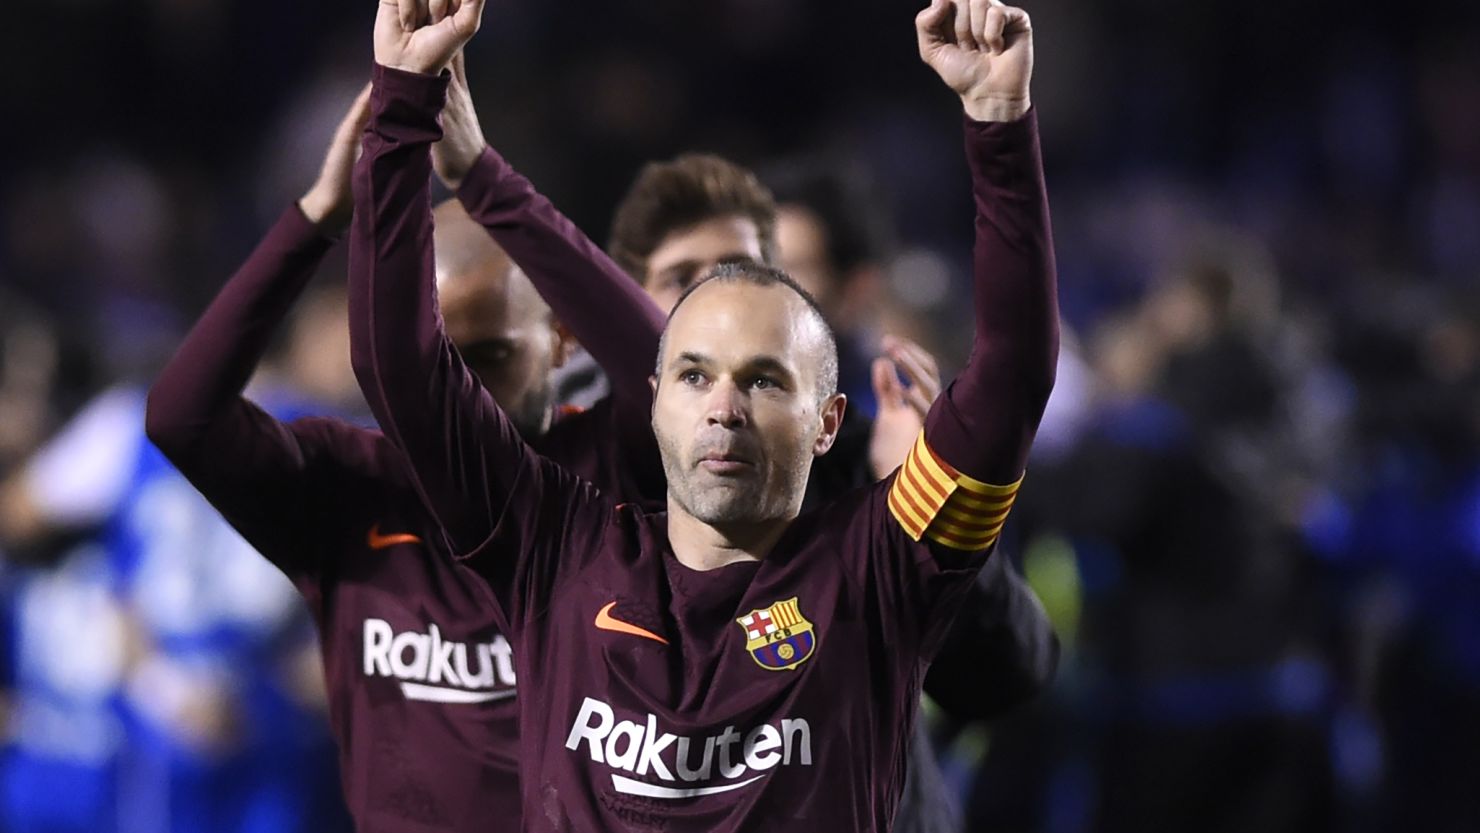 Barcelona midfielder Andres Iniesta celebrates after his team won the Spanish league against Deportivo Coruna to claim its 25th La Liga title. 